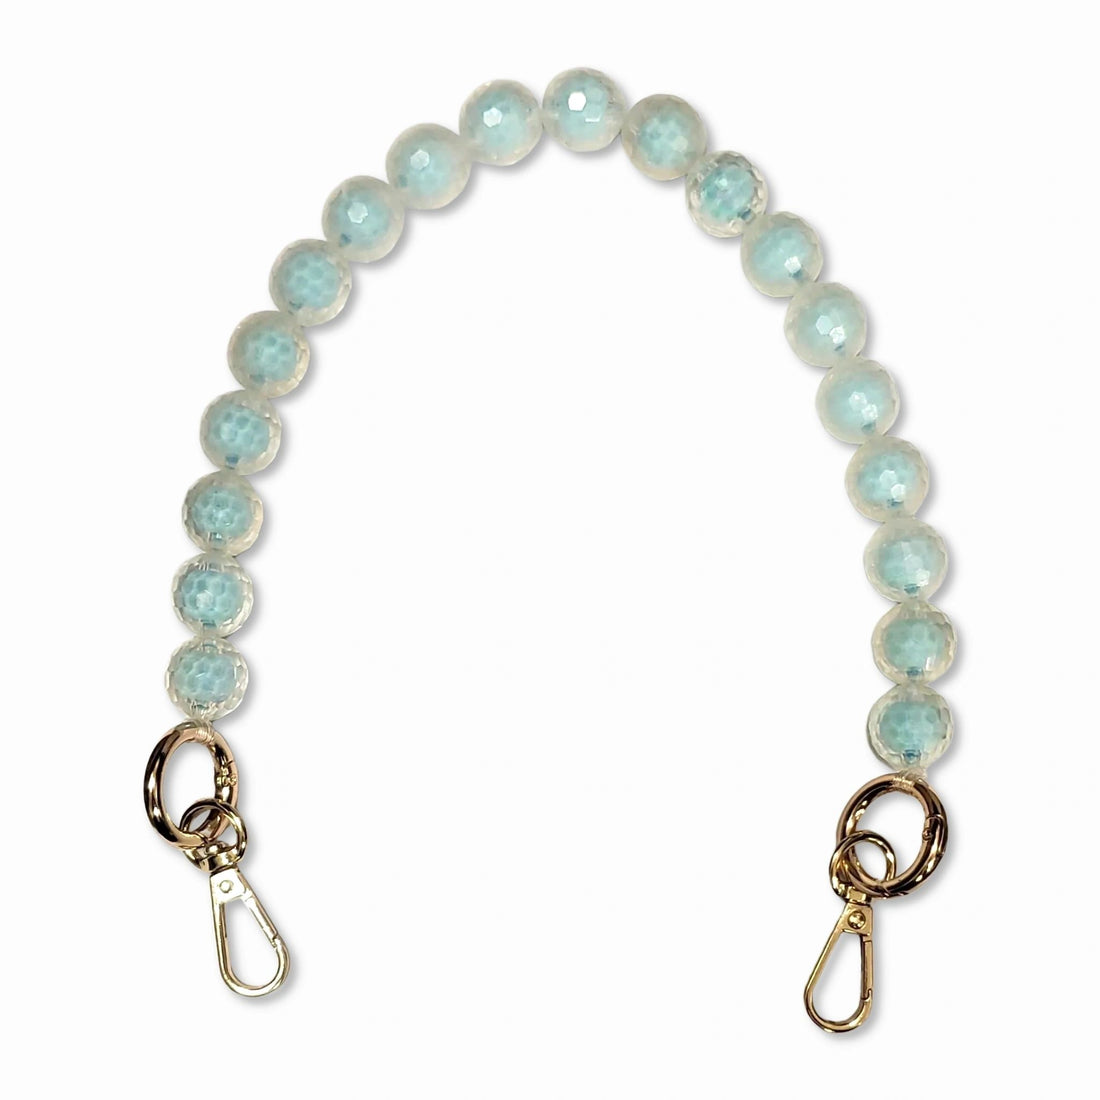 Summer - Holographic Reflection Bead Short Chain with Golden Carabiners